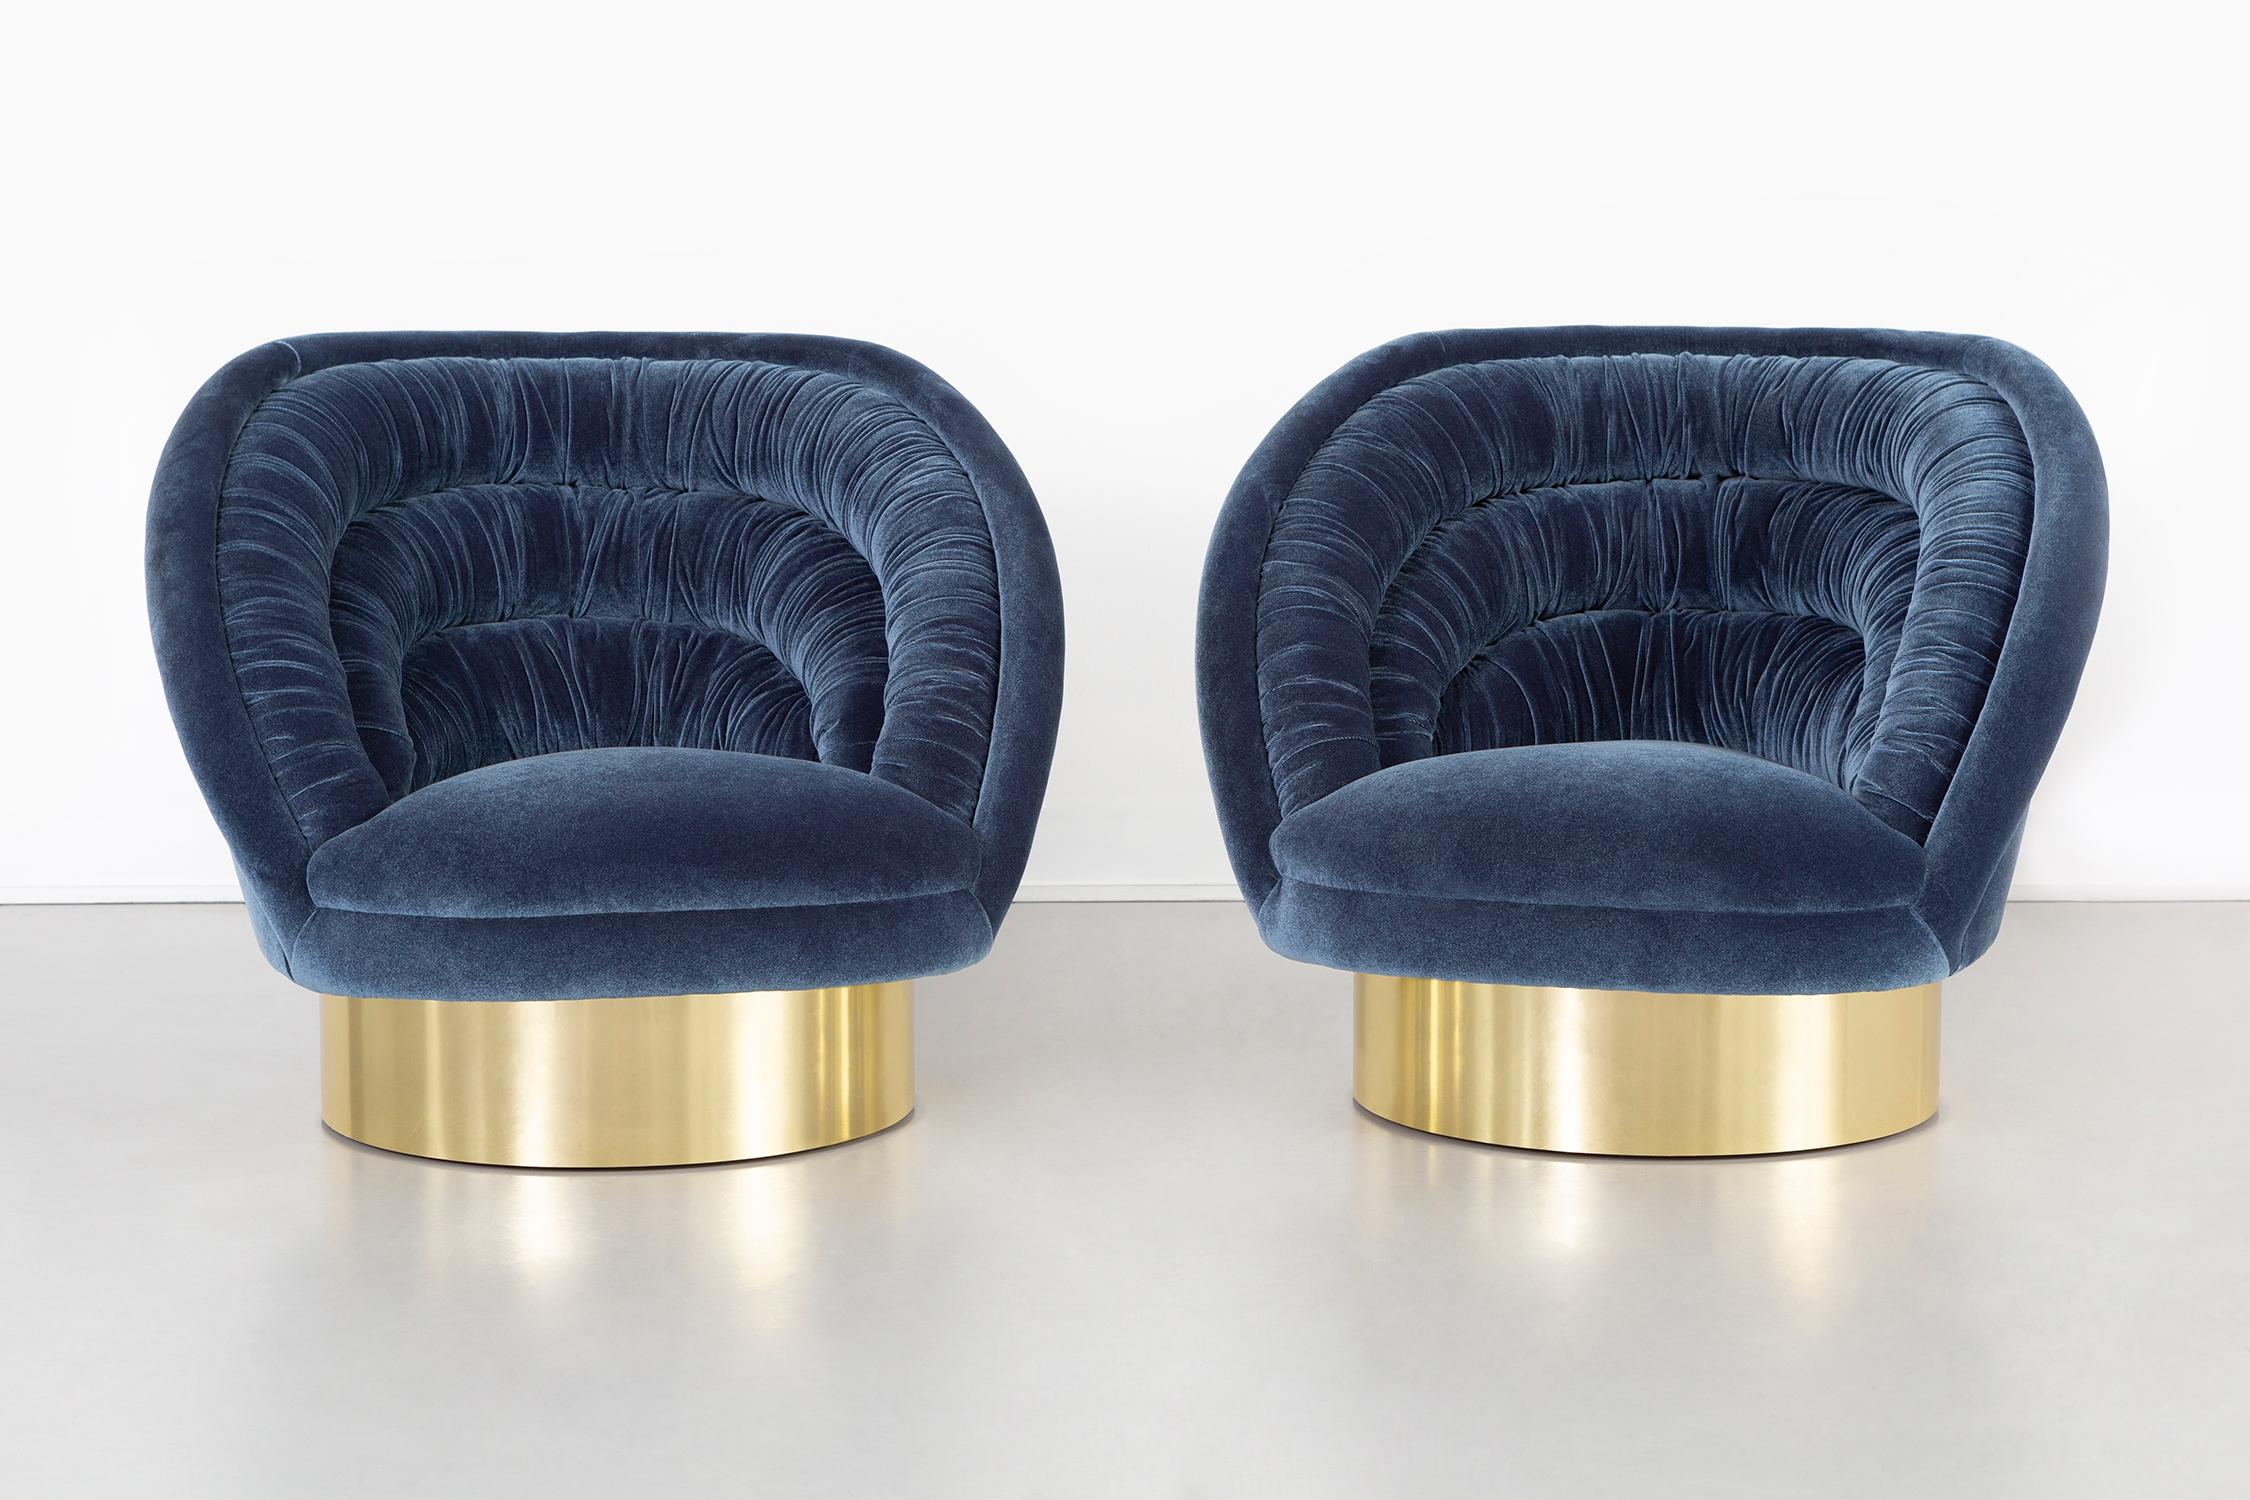 Set of two lounge chairs 

Designed by Vladimir Kagan

USA, circa 1970s 

Freshly reupholstered in mohair over brass 

Measures: 28” H x 32 ½” W x 30” D x seat 14 ½” H

Fabric swatch available upon request.